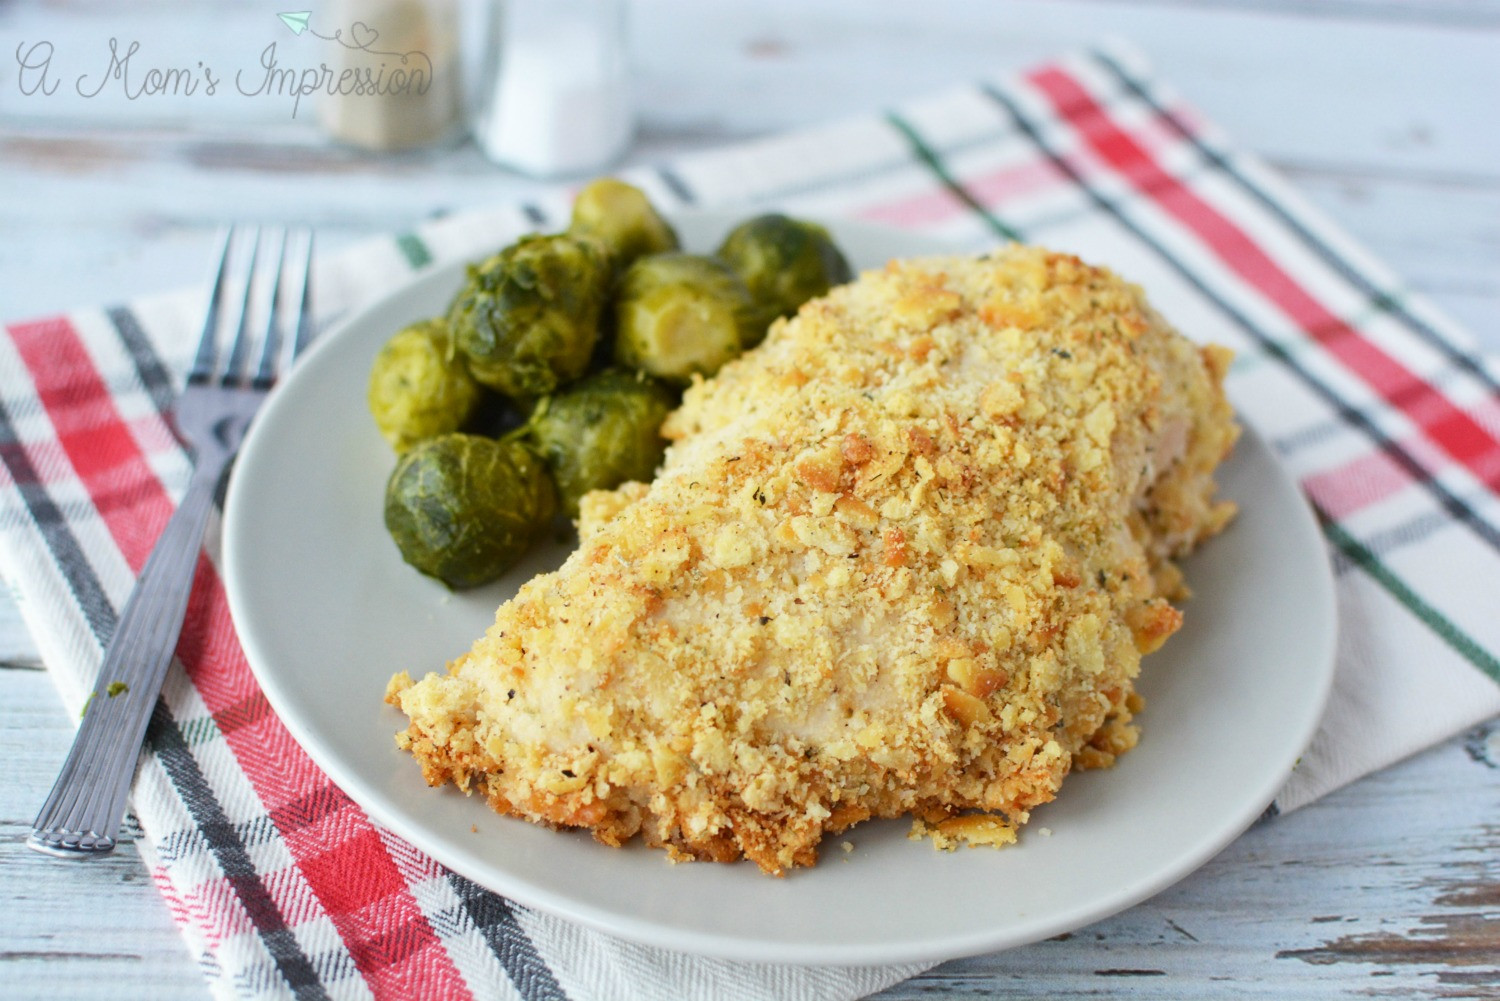 Baked Parmesan Crusted Chicken
 Easy Oven Baked Parmesan Crusted Chicken Recipe